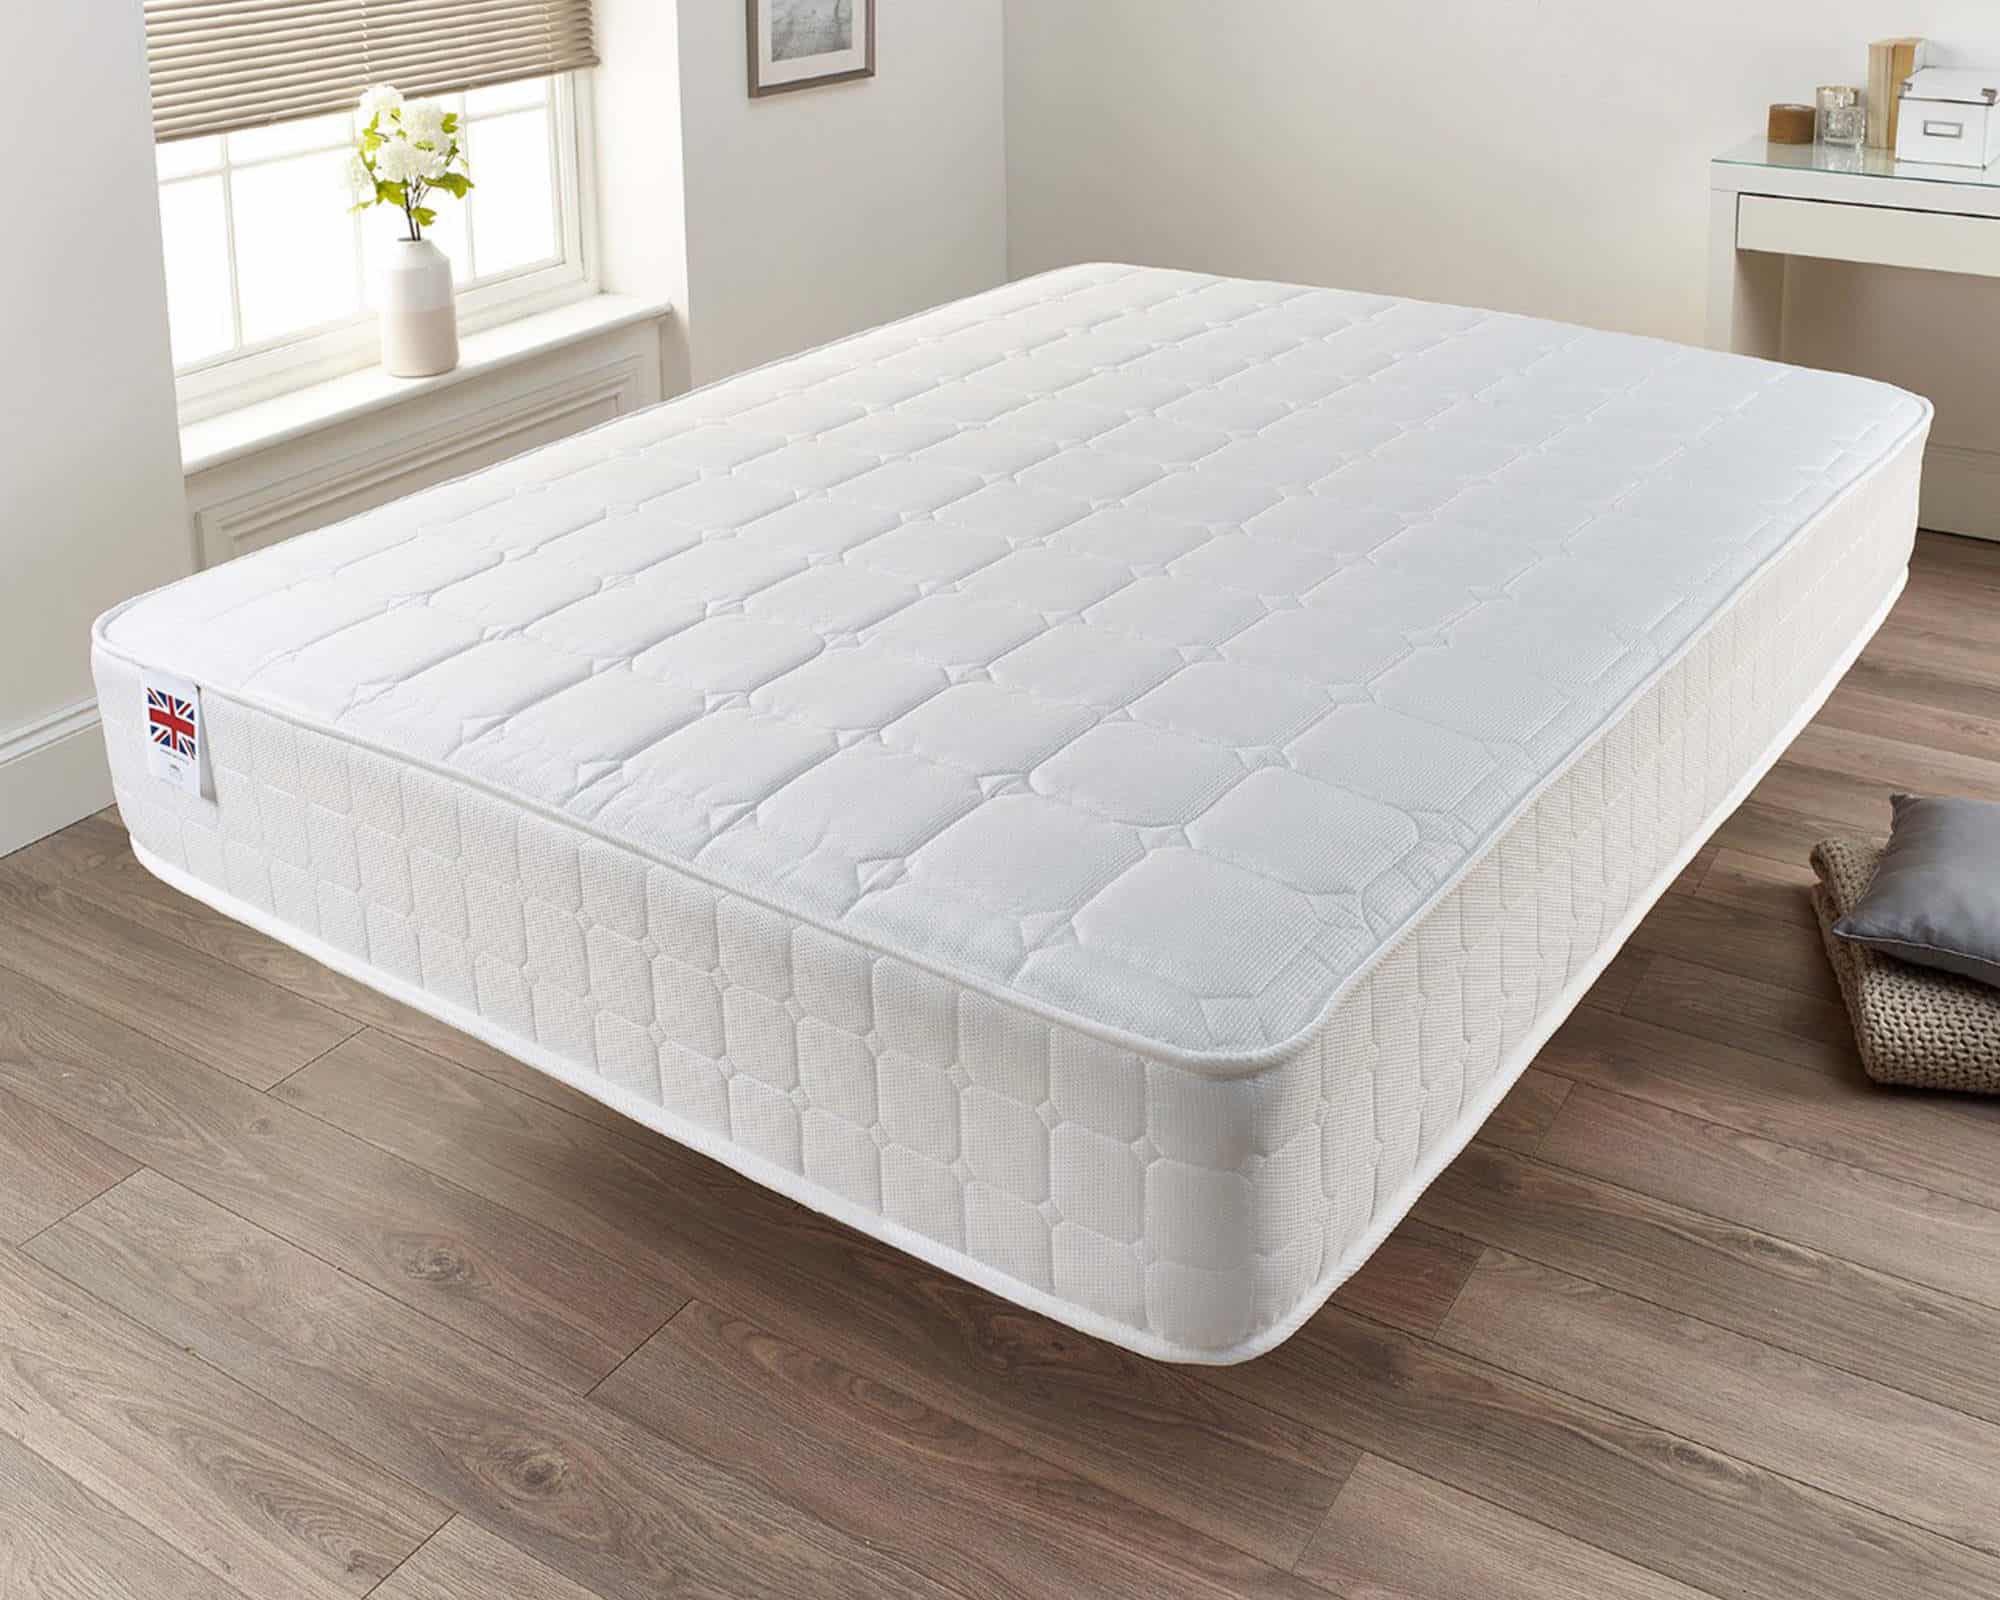 Reveal 66+ Impressive mattresses without amy metal springs Satisfy Your Imagination